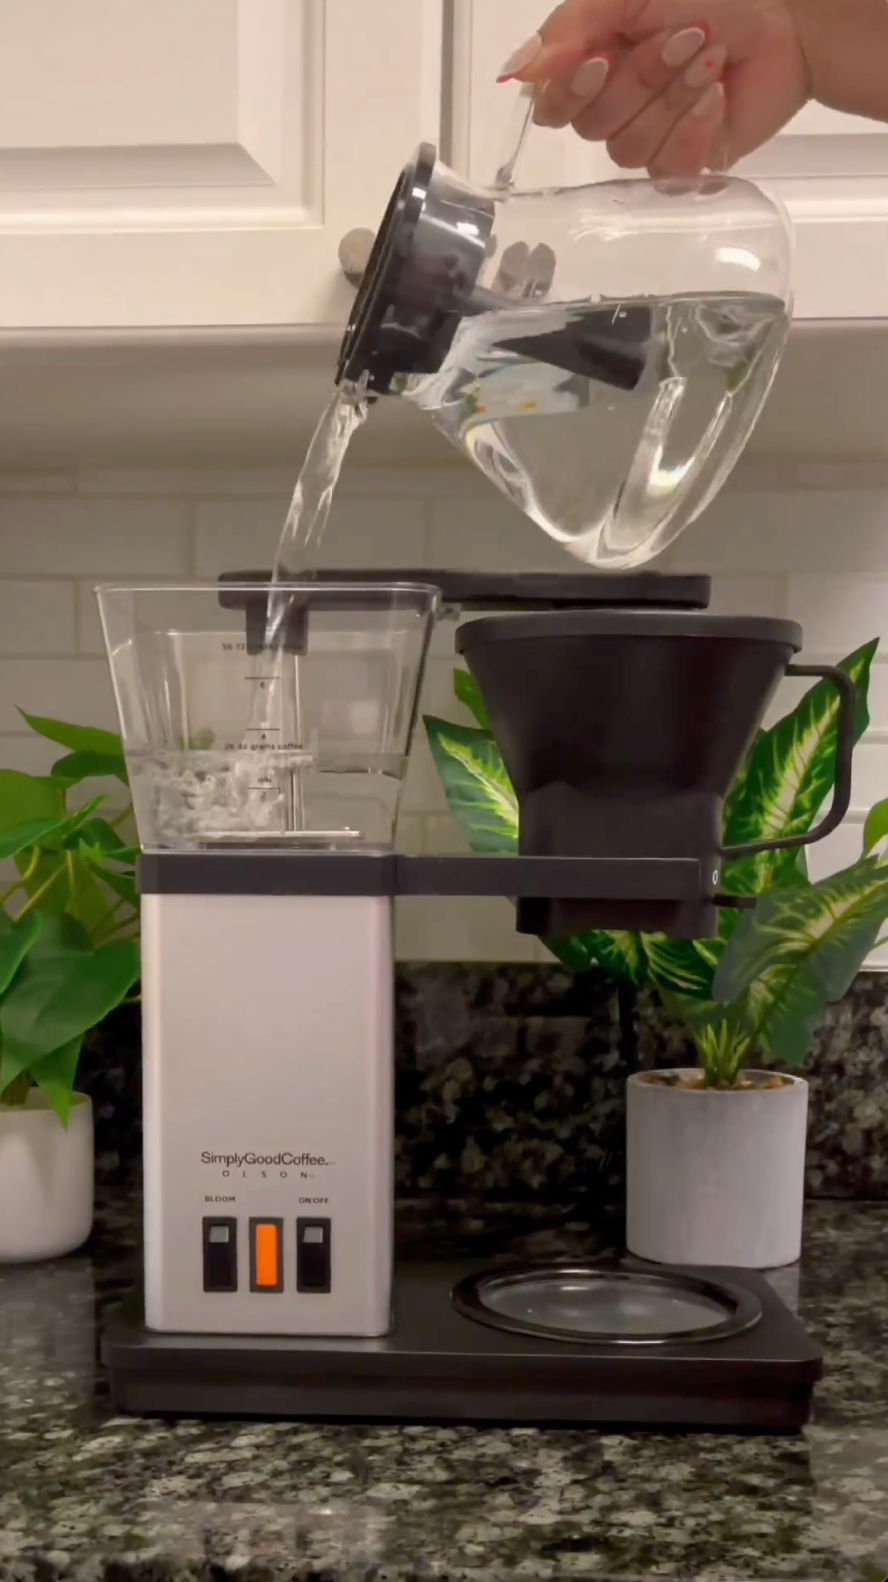 It's like a robot that does your pour-over for you #simplygood